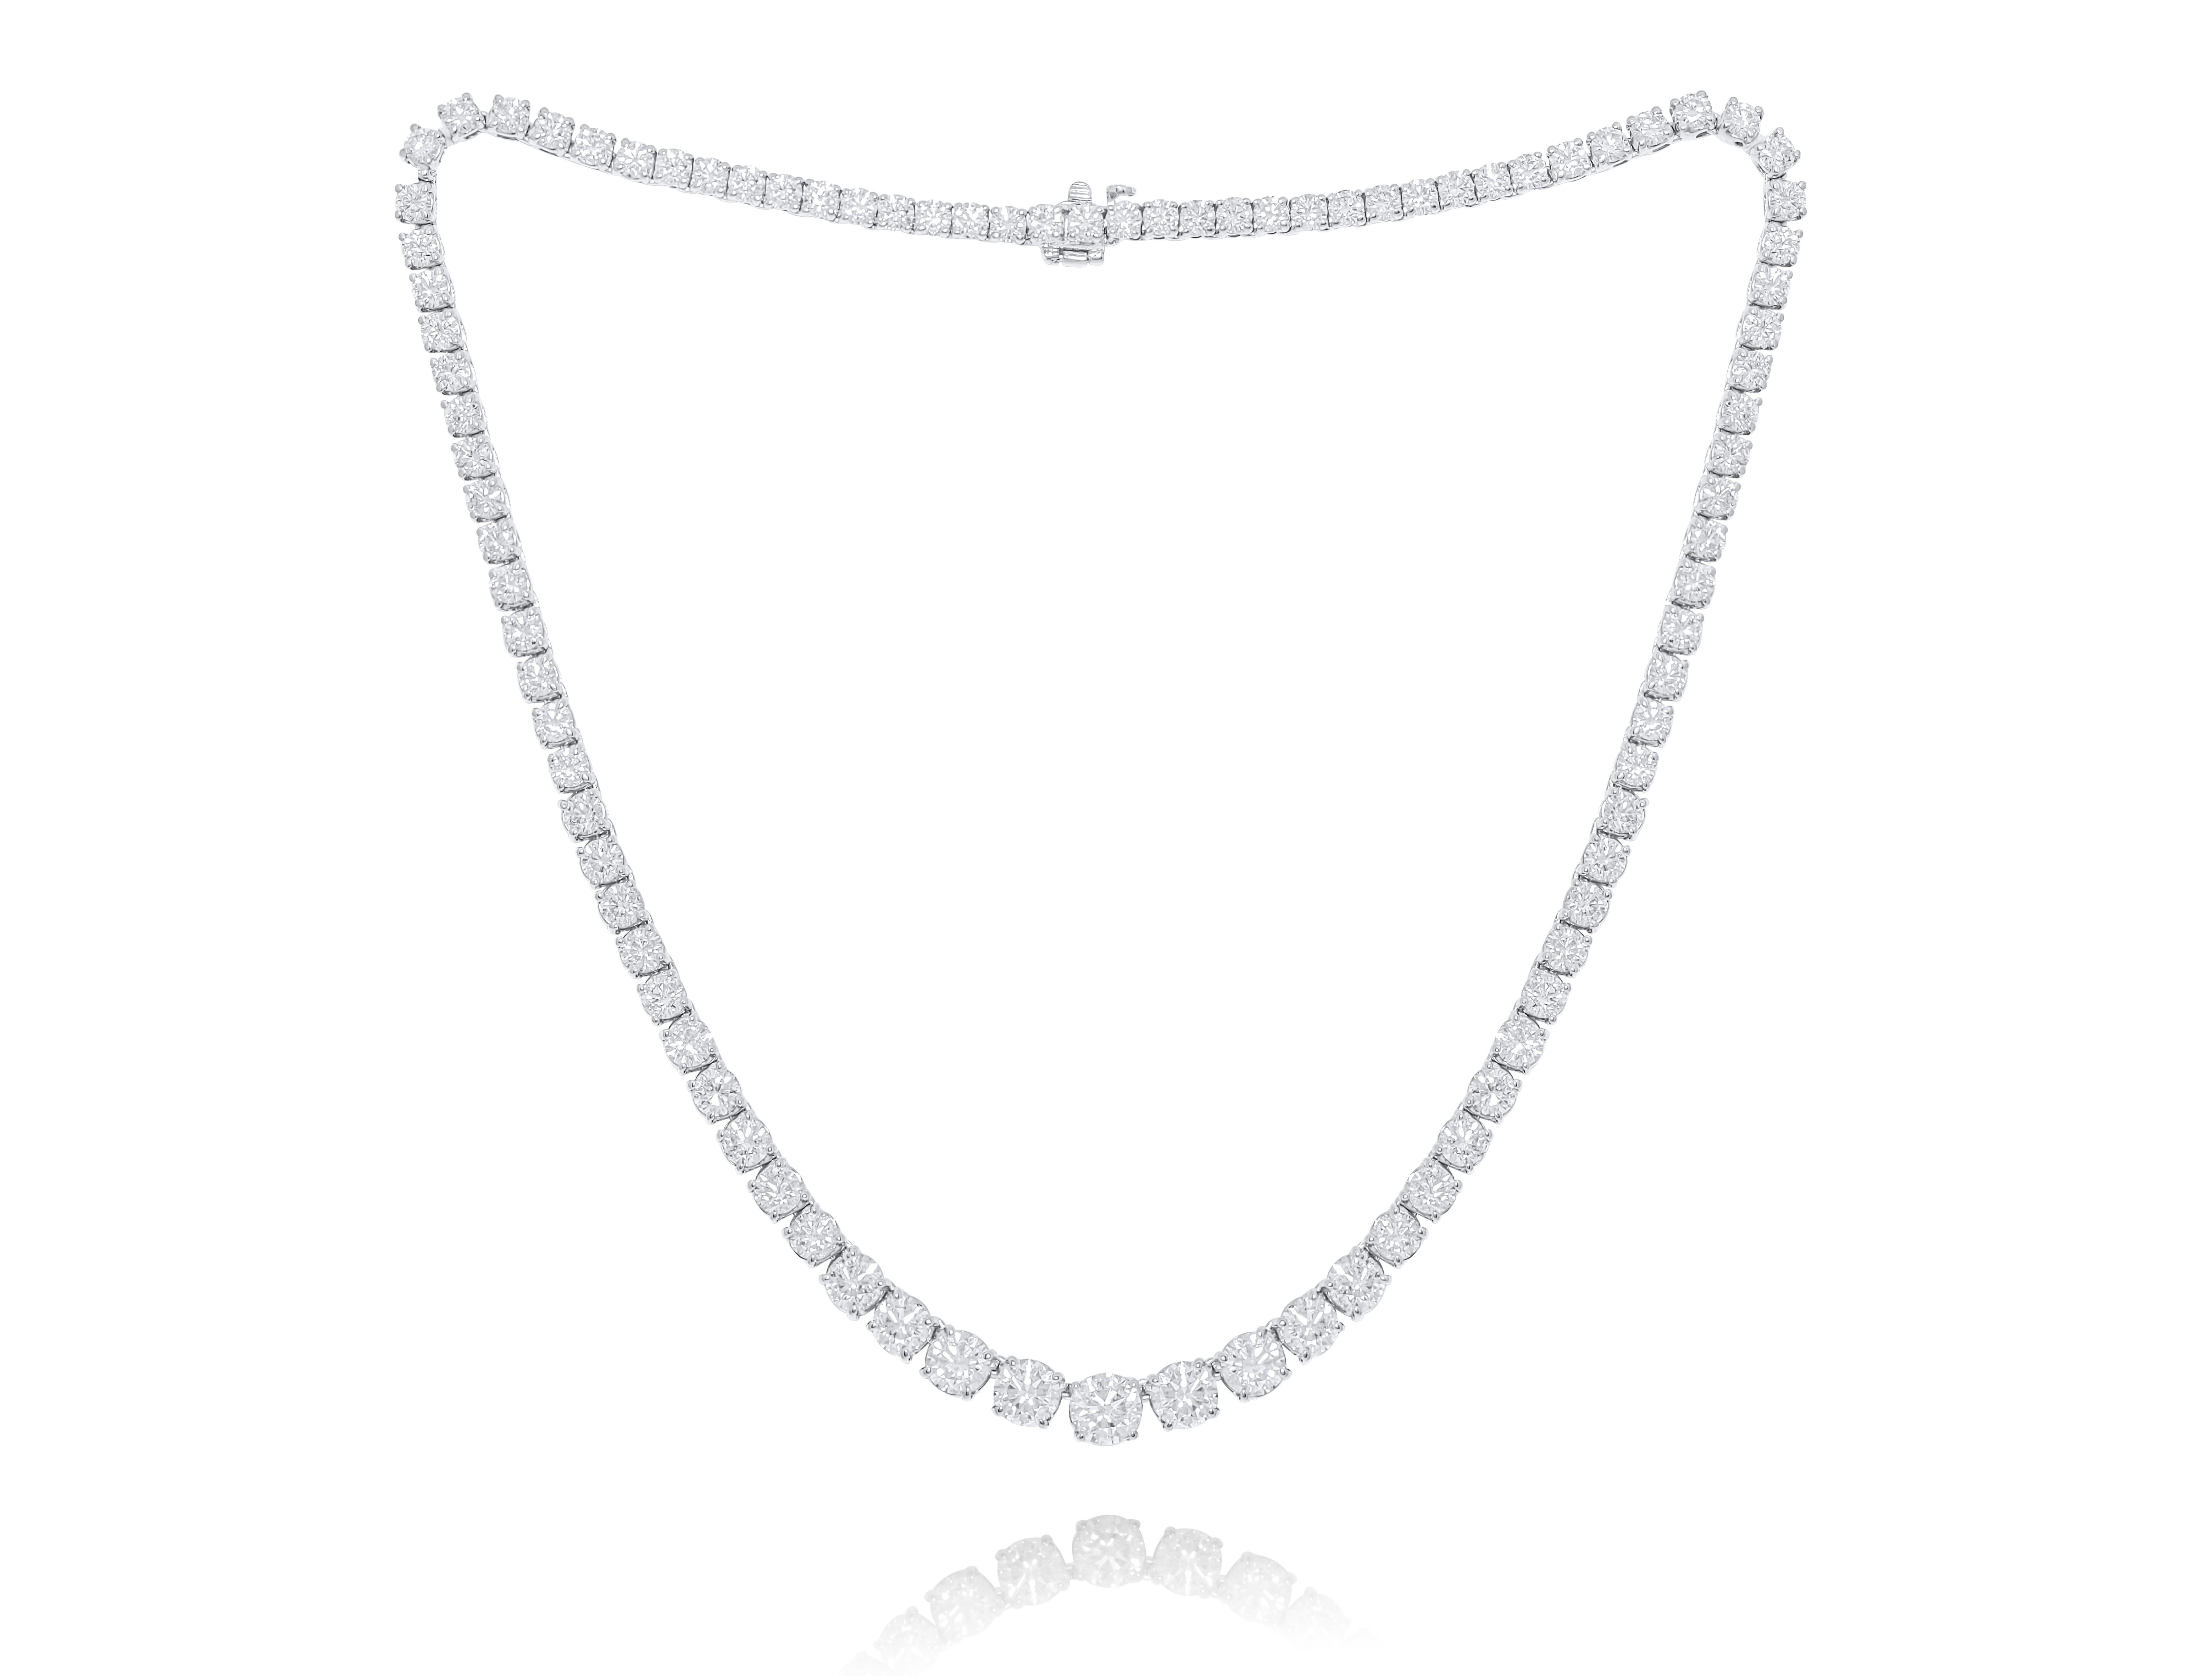 Custom 18k white gold graduated tennis necklace  20.05 cts round brilliant diamonds set in a 4 prong setting 93 stones 0.22 each FG color SI clarity. Excellent  cut. 
